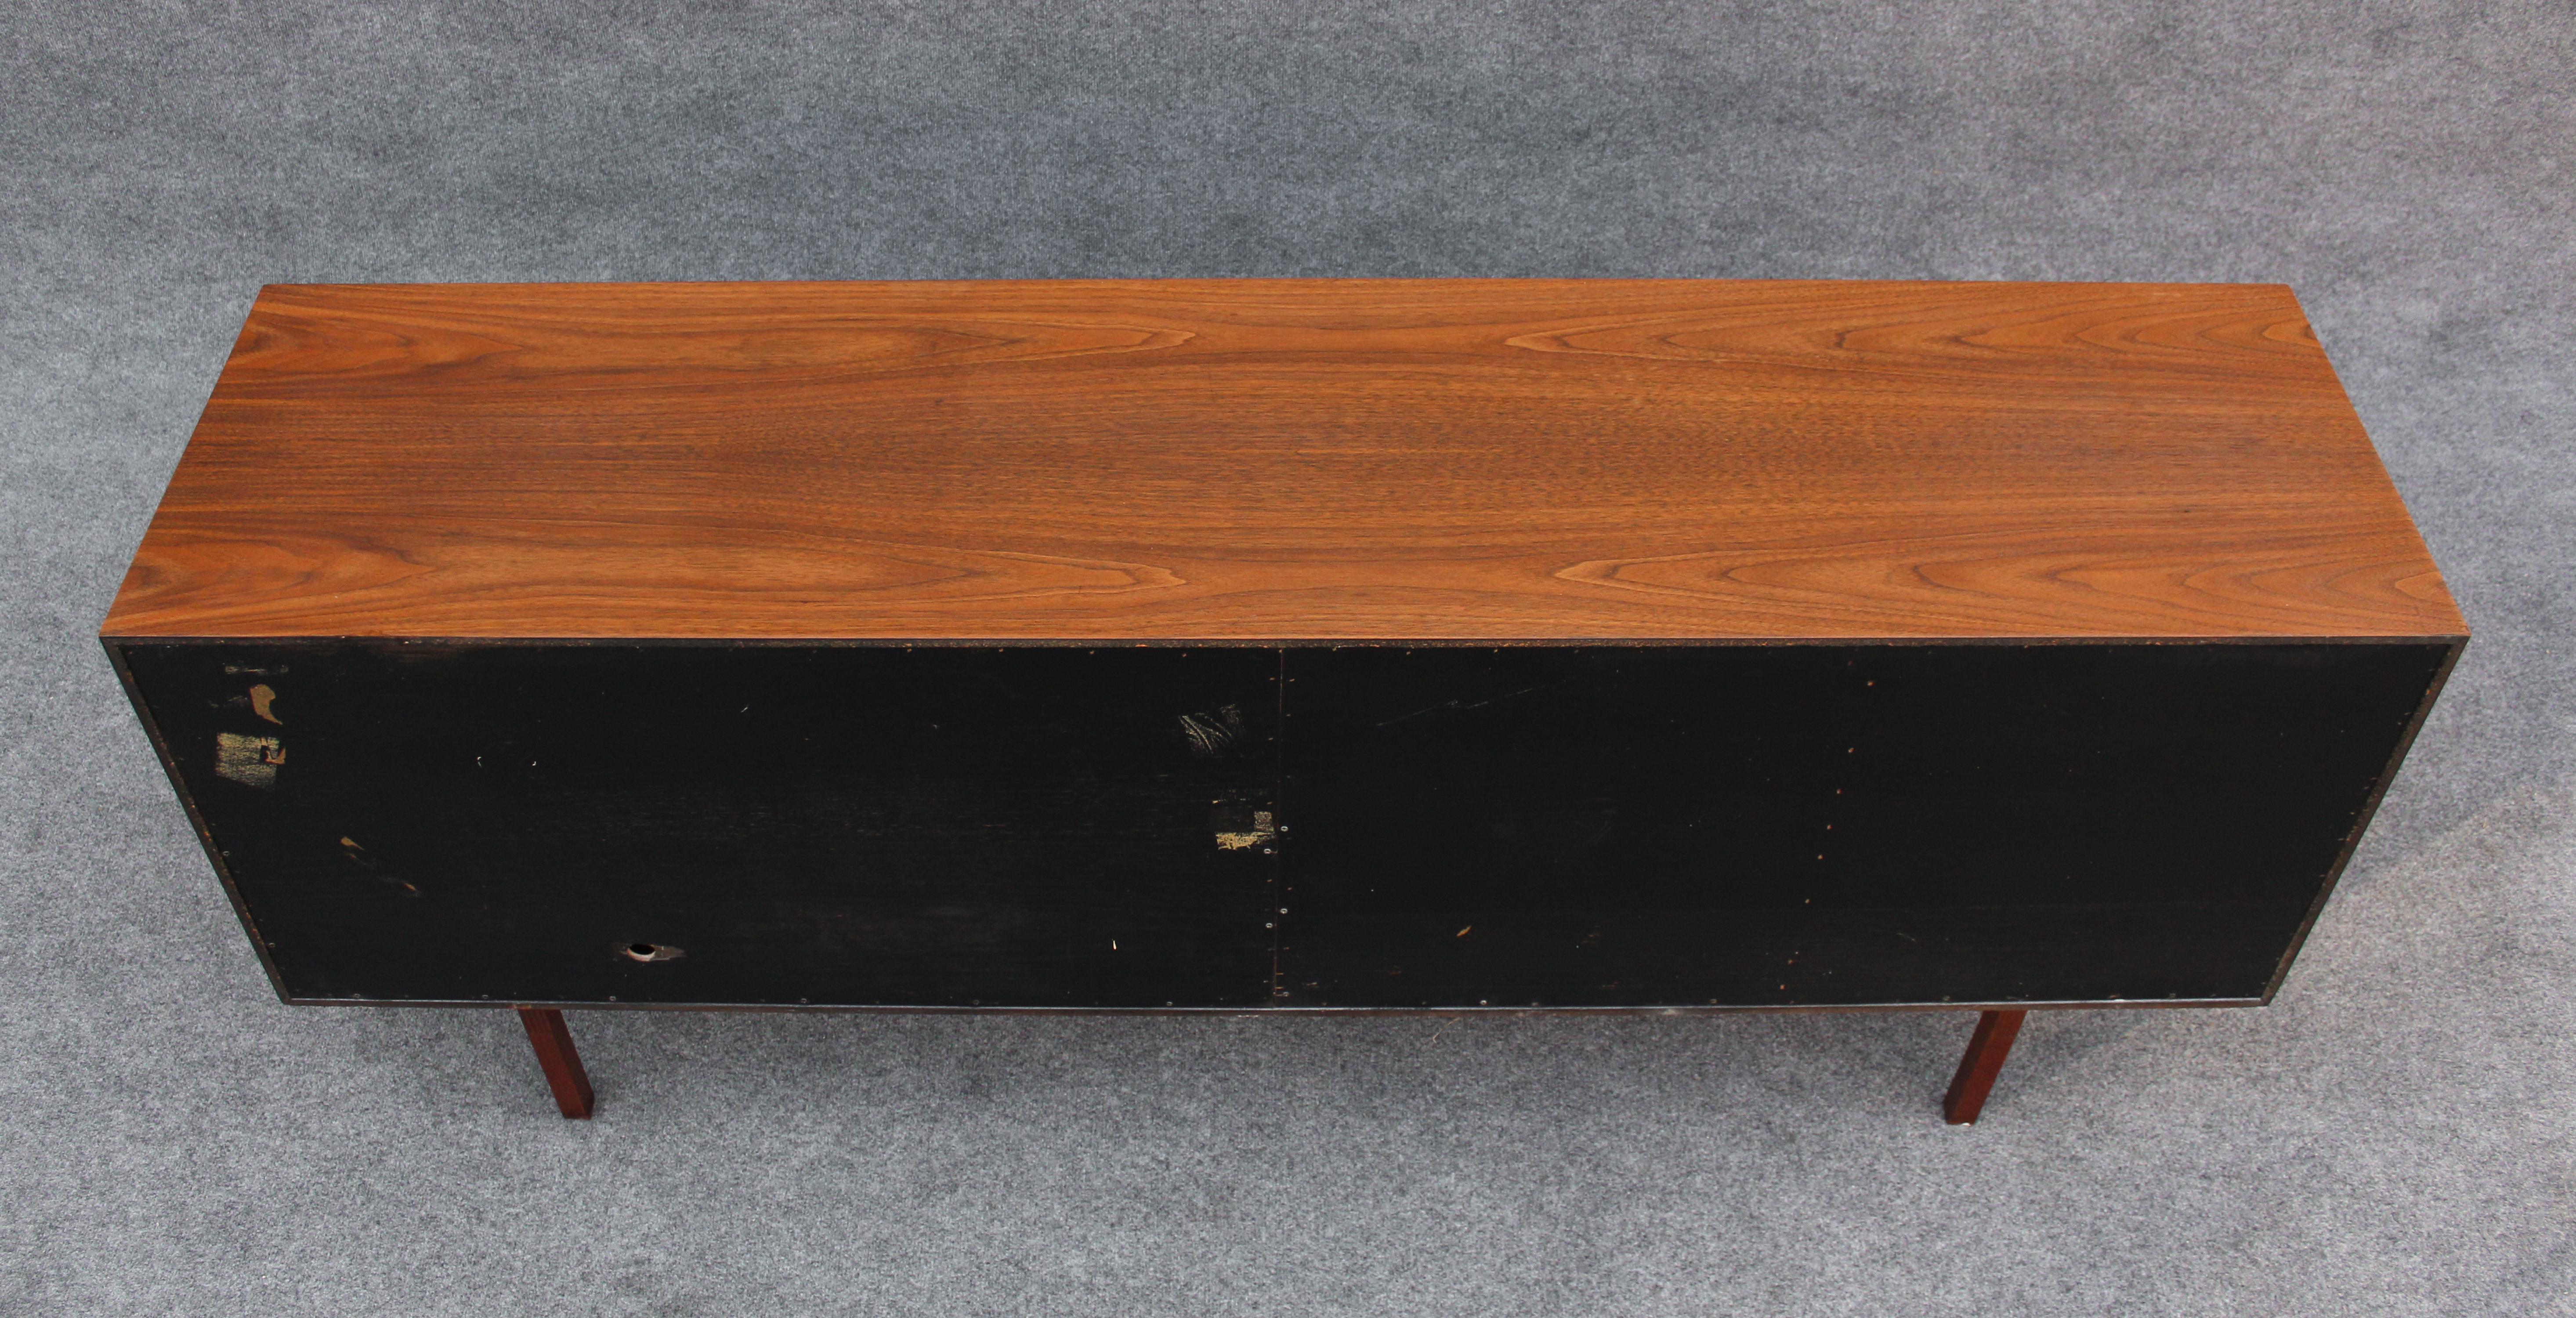 Restored Florence Knoll Walnut & Maple Cabinet Model No.541 New York, 1960s For Sale 5